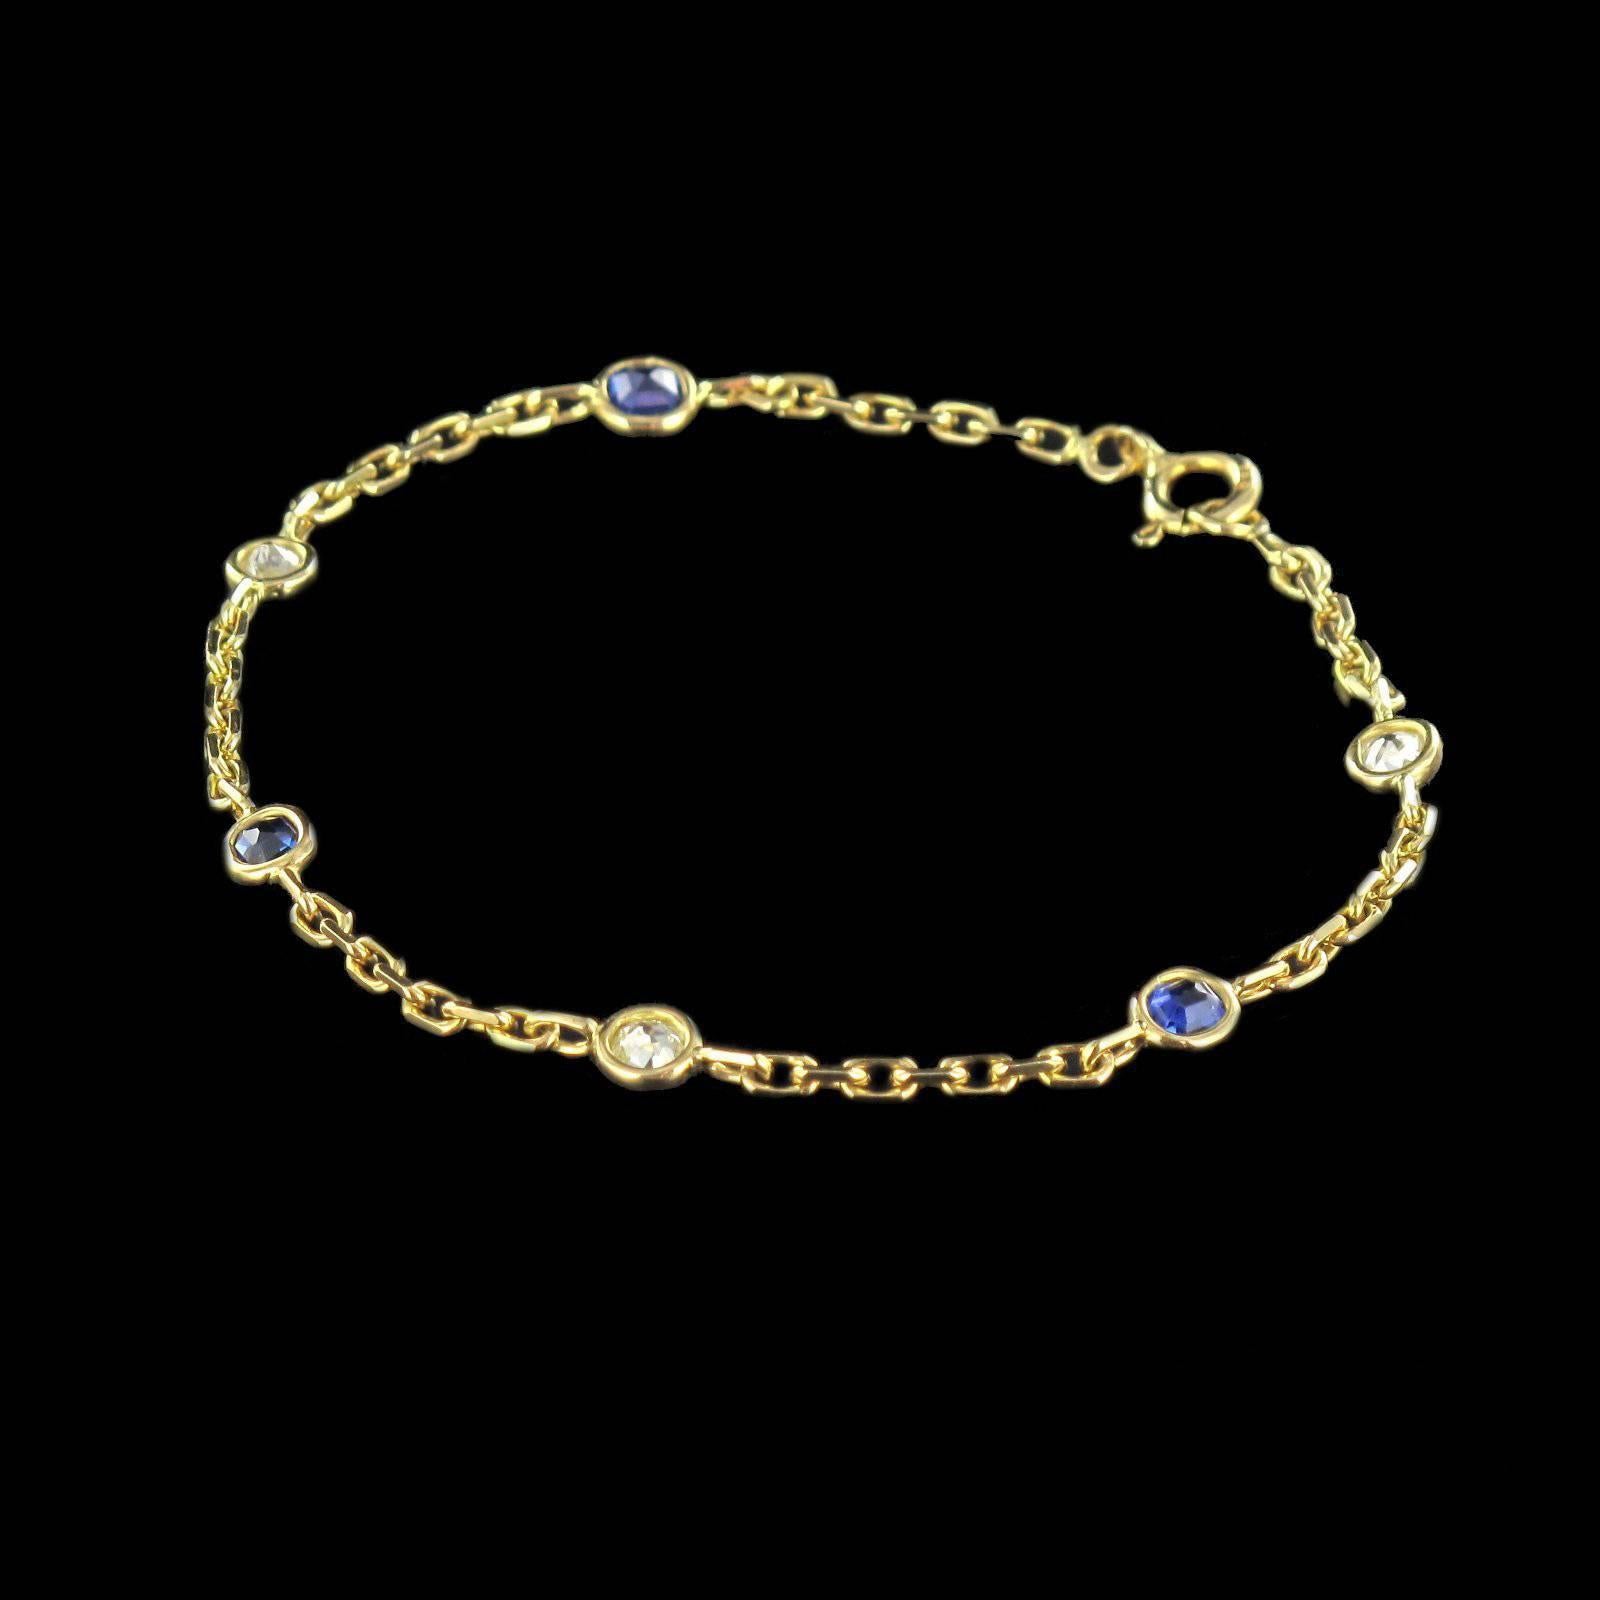 Baume creation.

Ring in 18 carat yellow gold, eagle head hallmark. 

The chain links are regularly and alternately interspersed by 3 diamonds and 3 blue sapphires in bezel settings. This bracelet has a spring ring clasp. 

Length: 18.5 cm,